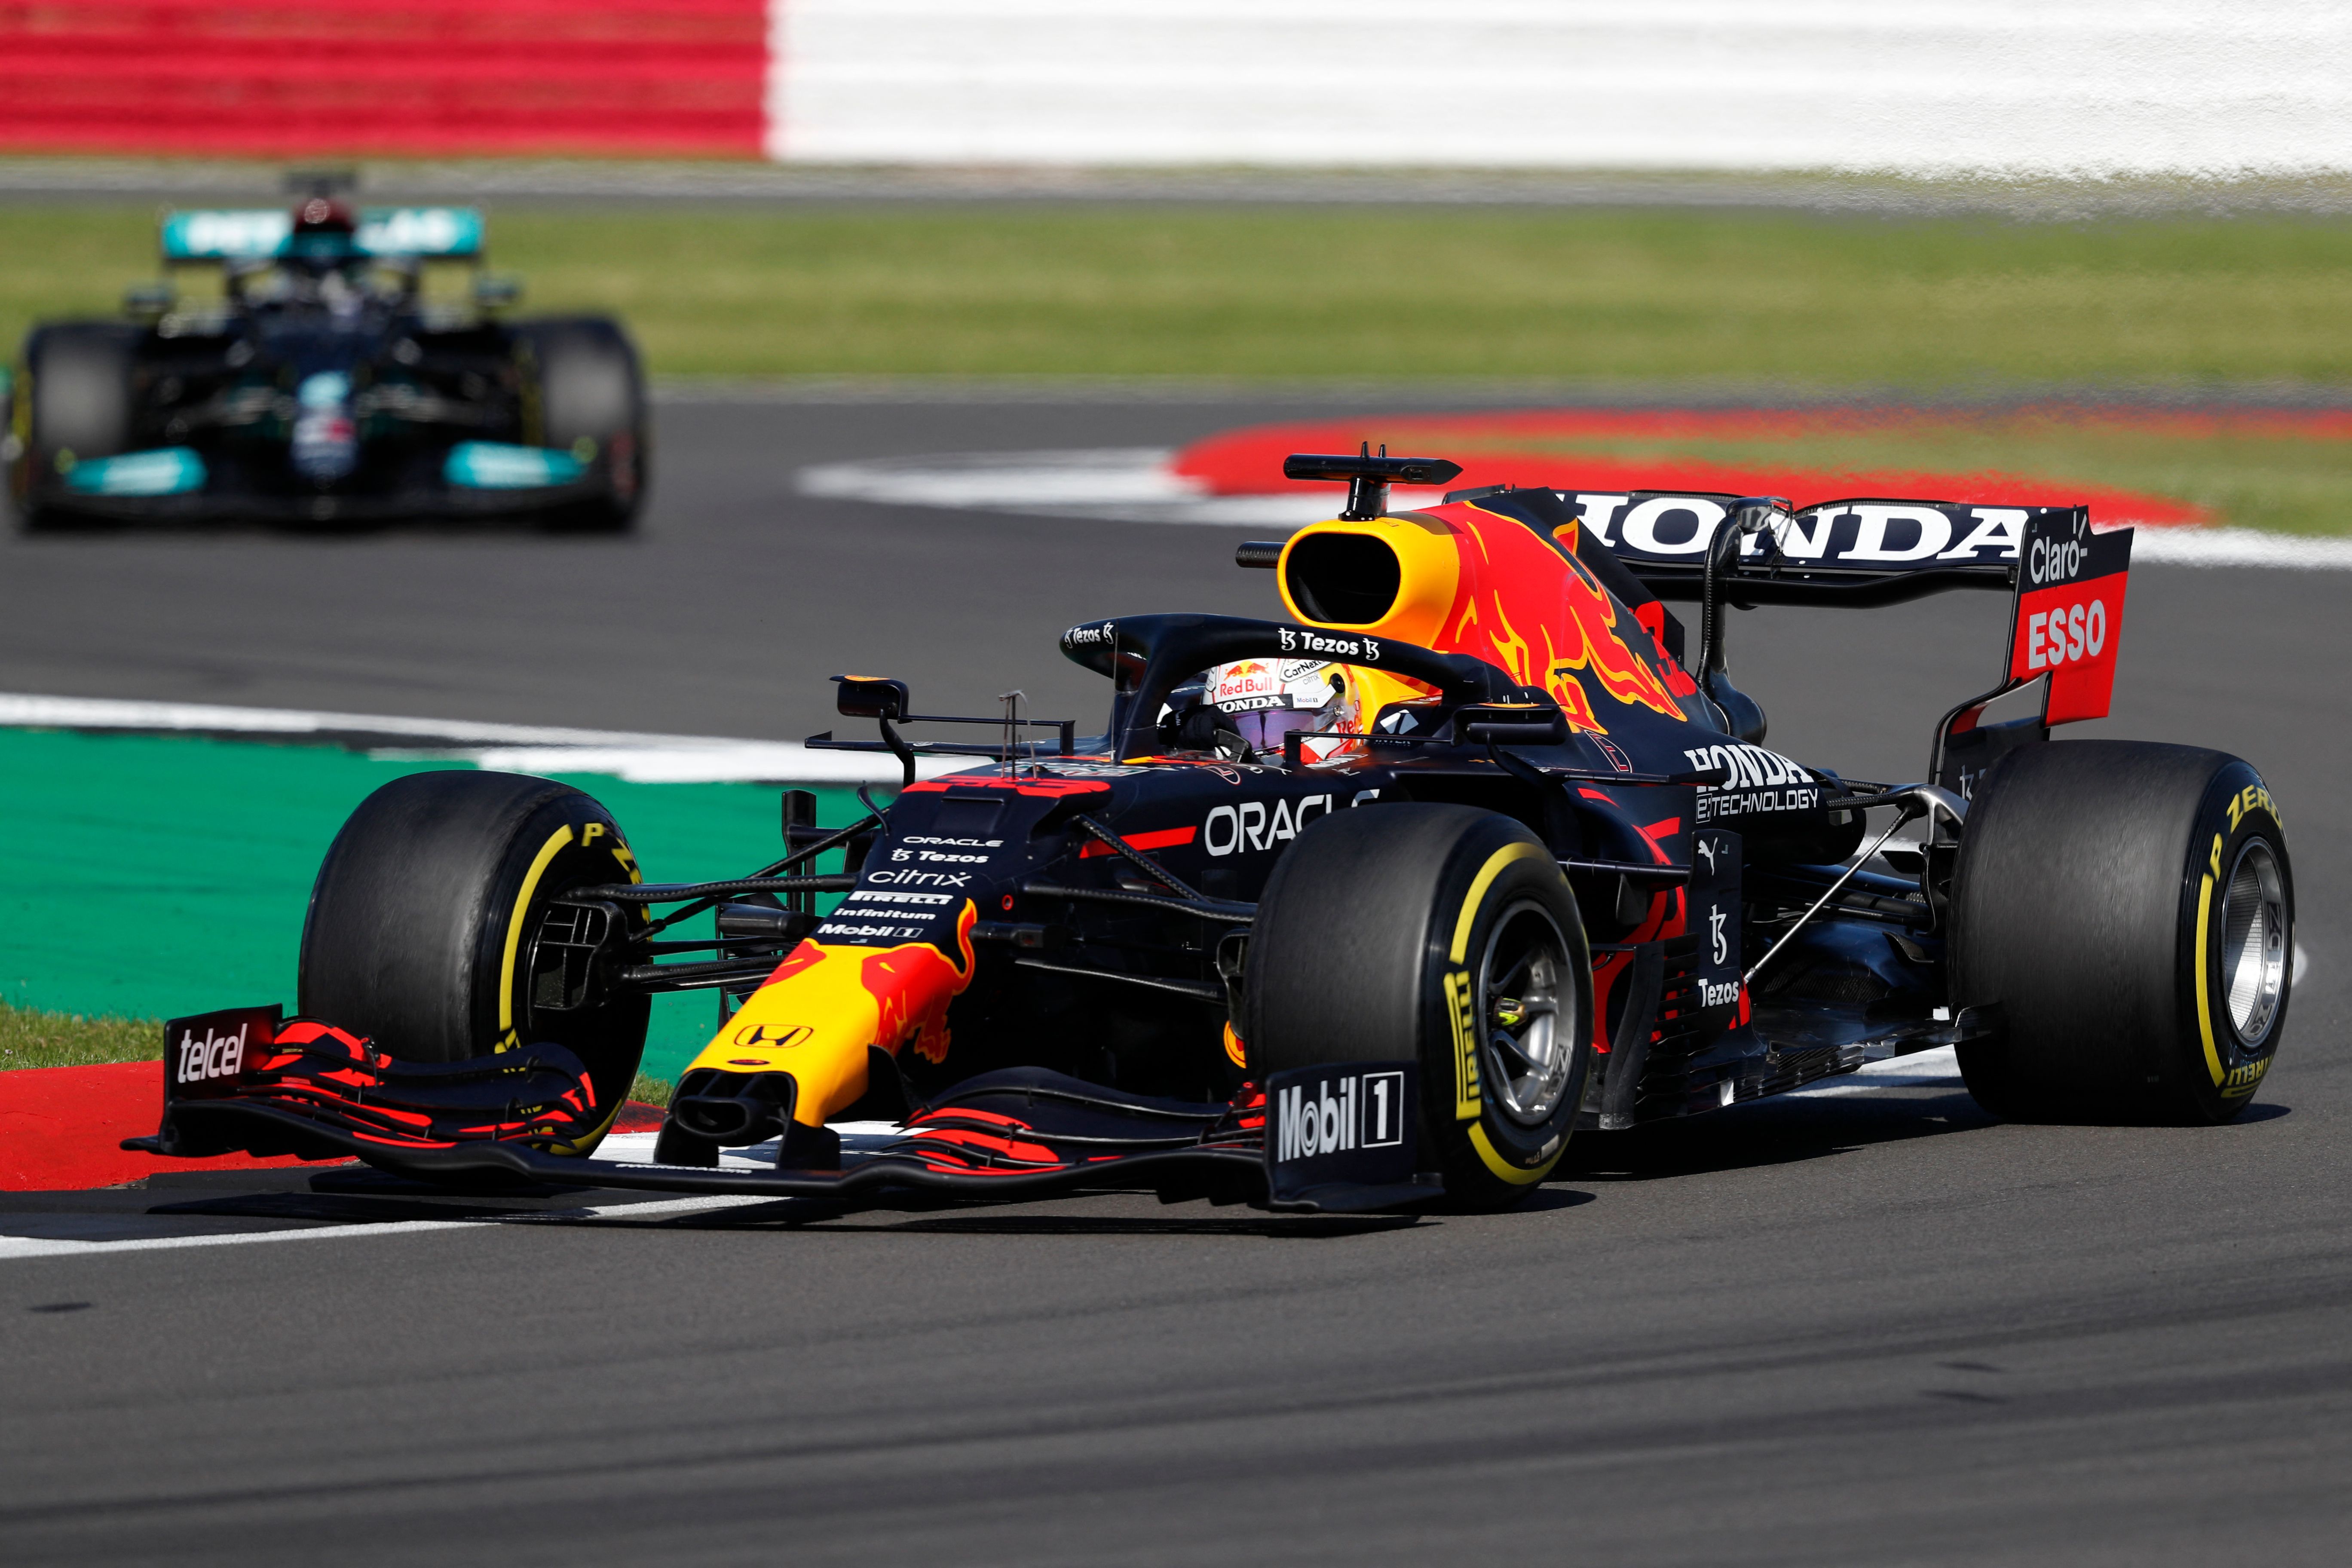 atmosfeer Specificiteit In beweging Max Verstappen Makes F1 History With Sprint Qualifying Triumph at  Silverstone